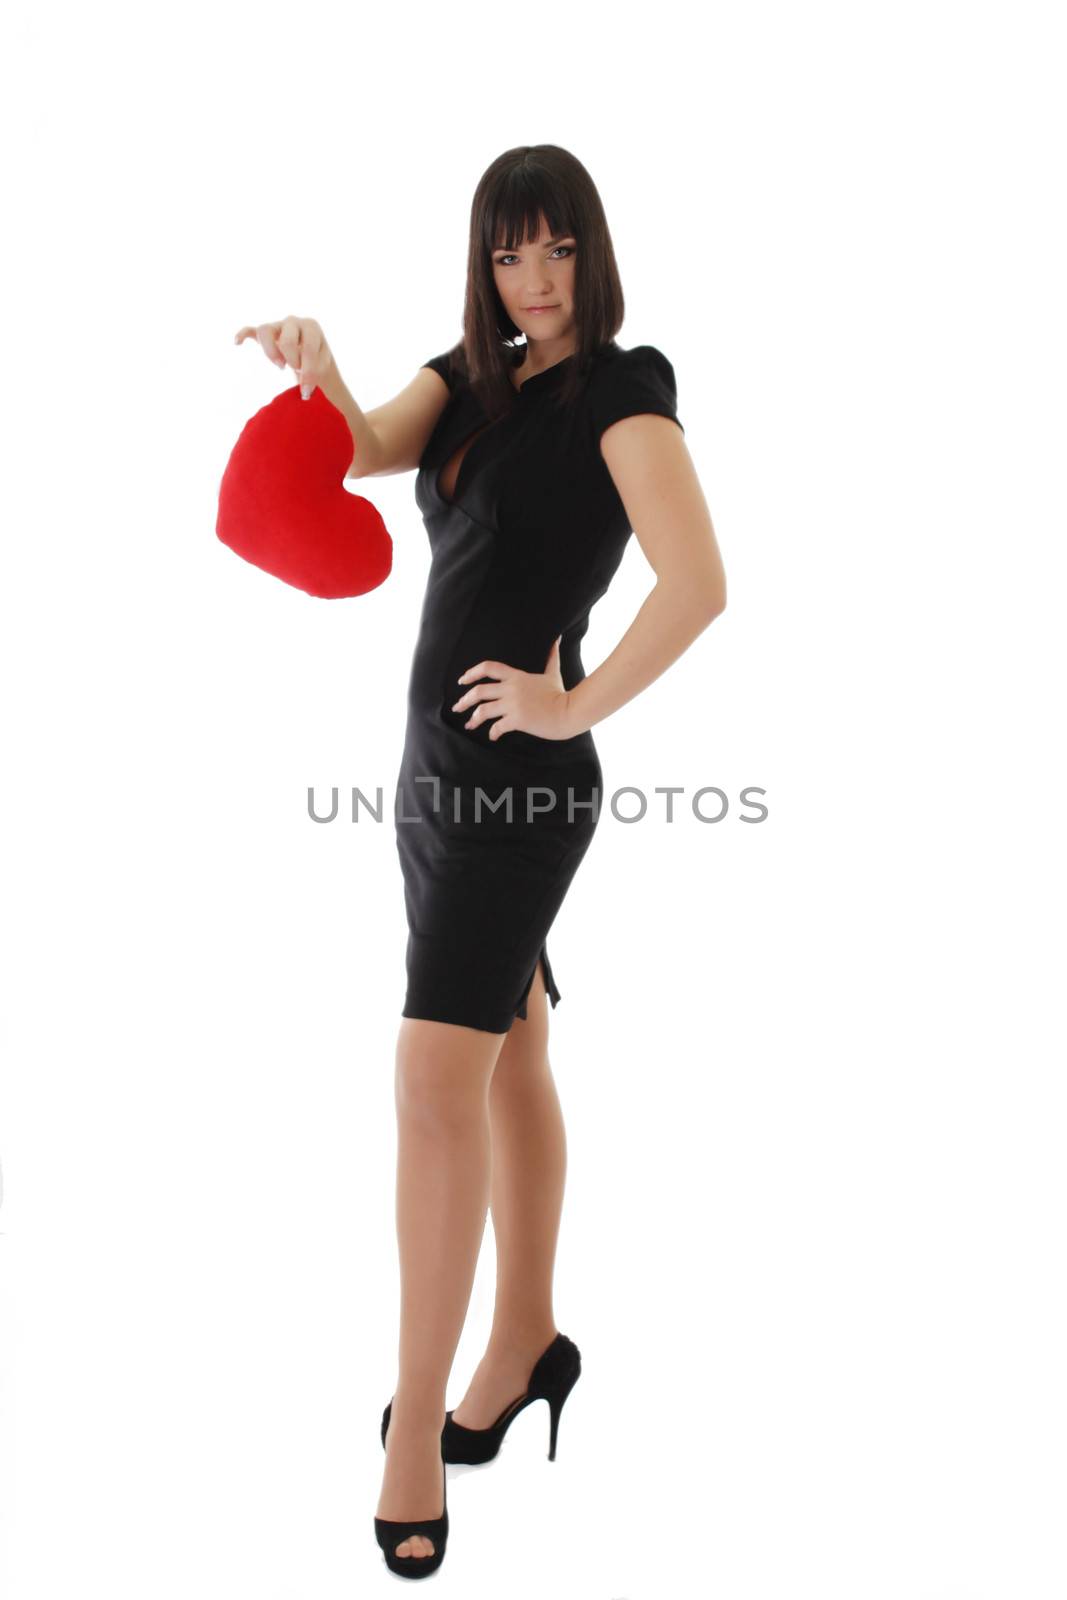 Elegant woman in dress and heels holding heart over white